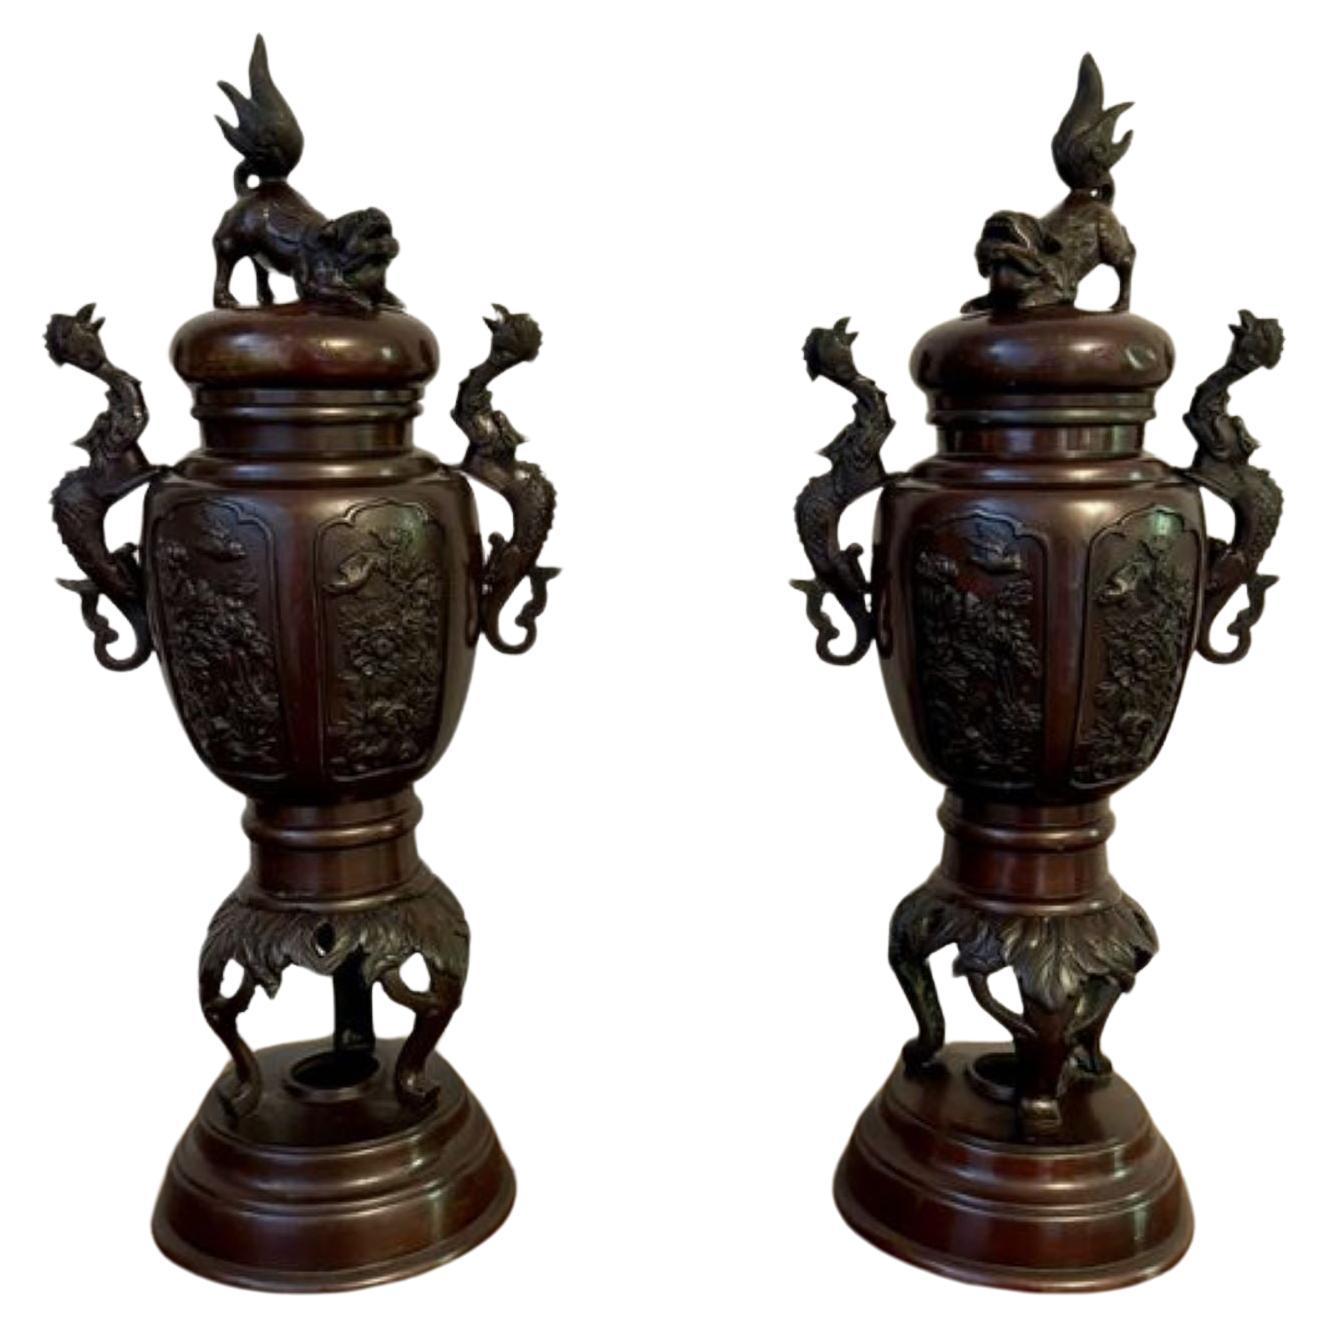 Outstanding quality pair of antique Japanese bronze lidded vases